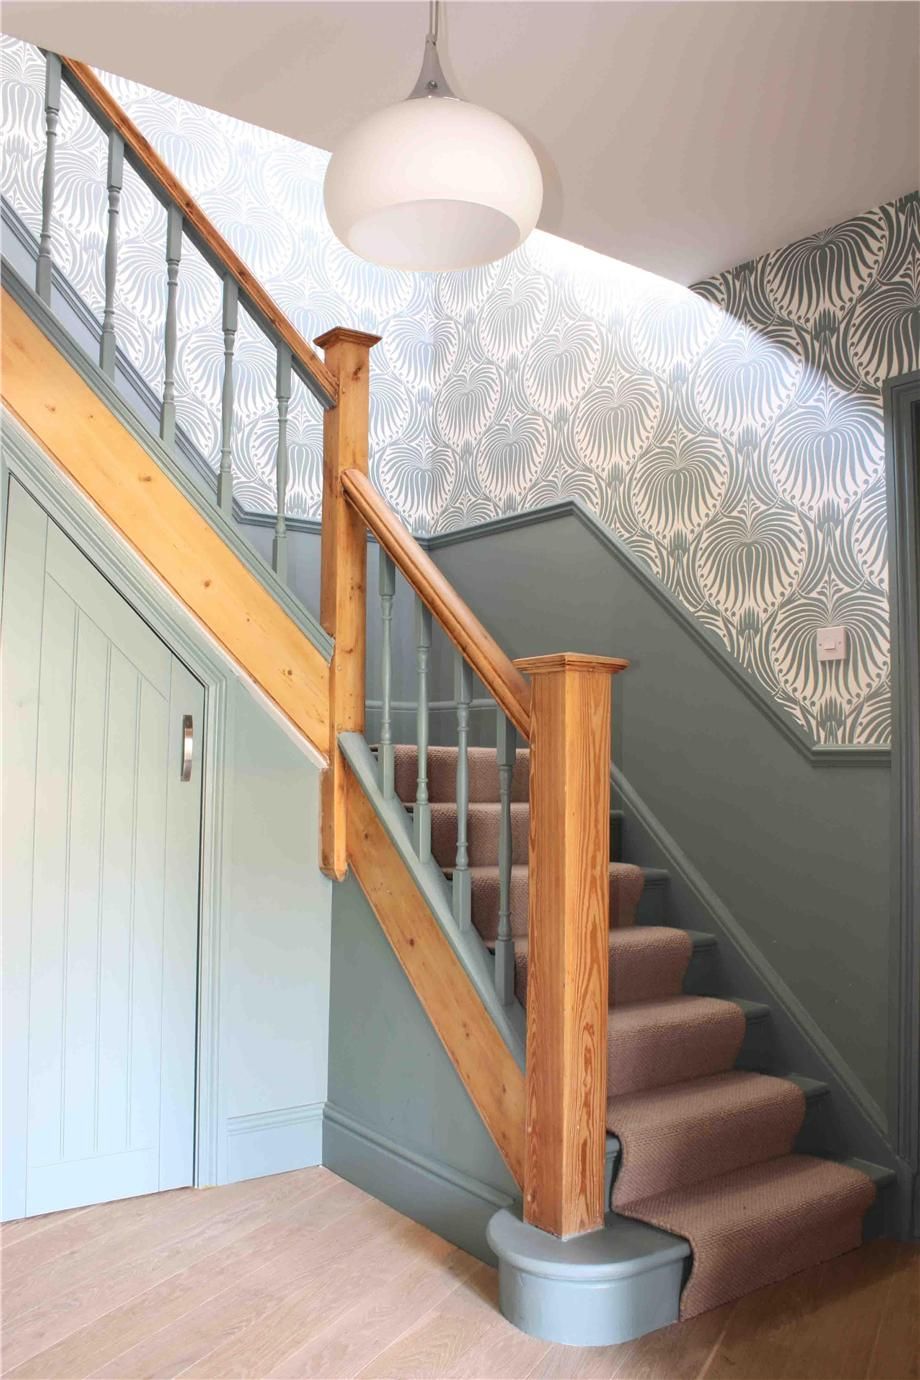 half wallpaper half paint ideas,stairs,handrail,product,property,baluster